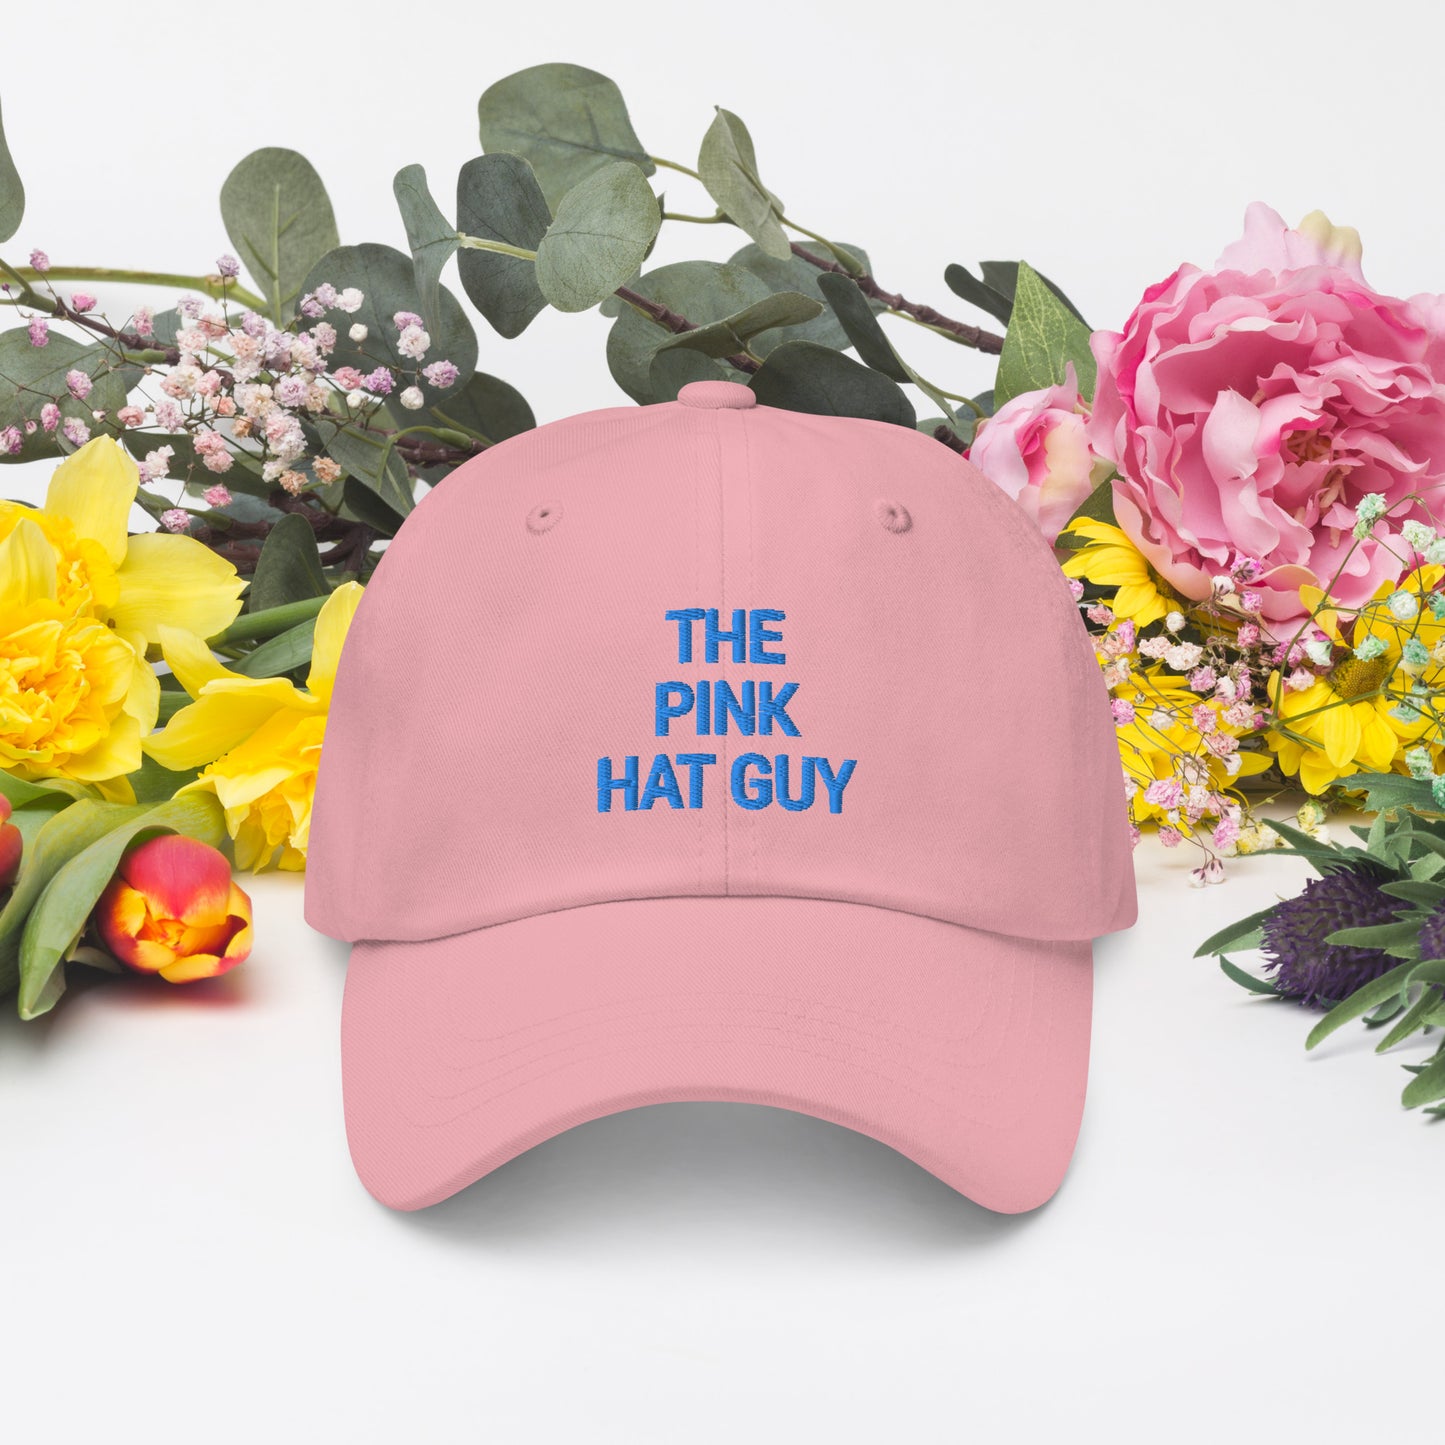 The Pink Hat Guy / The Pink Hat Guy Dad hat